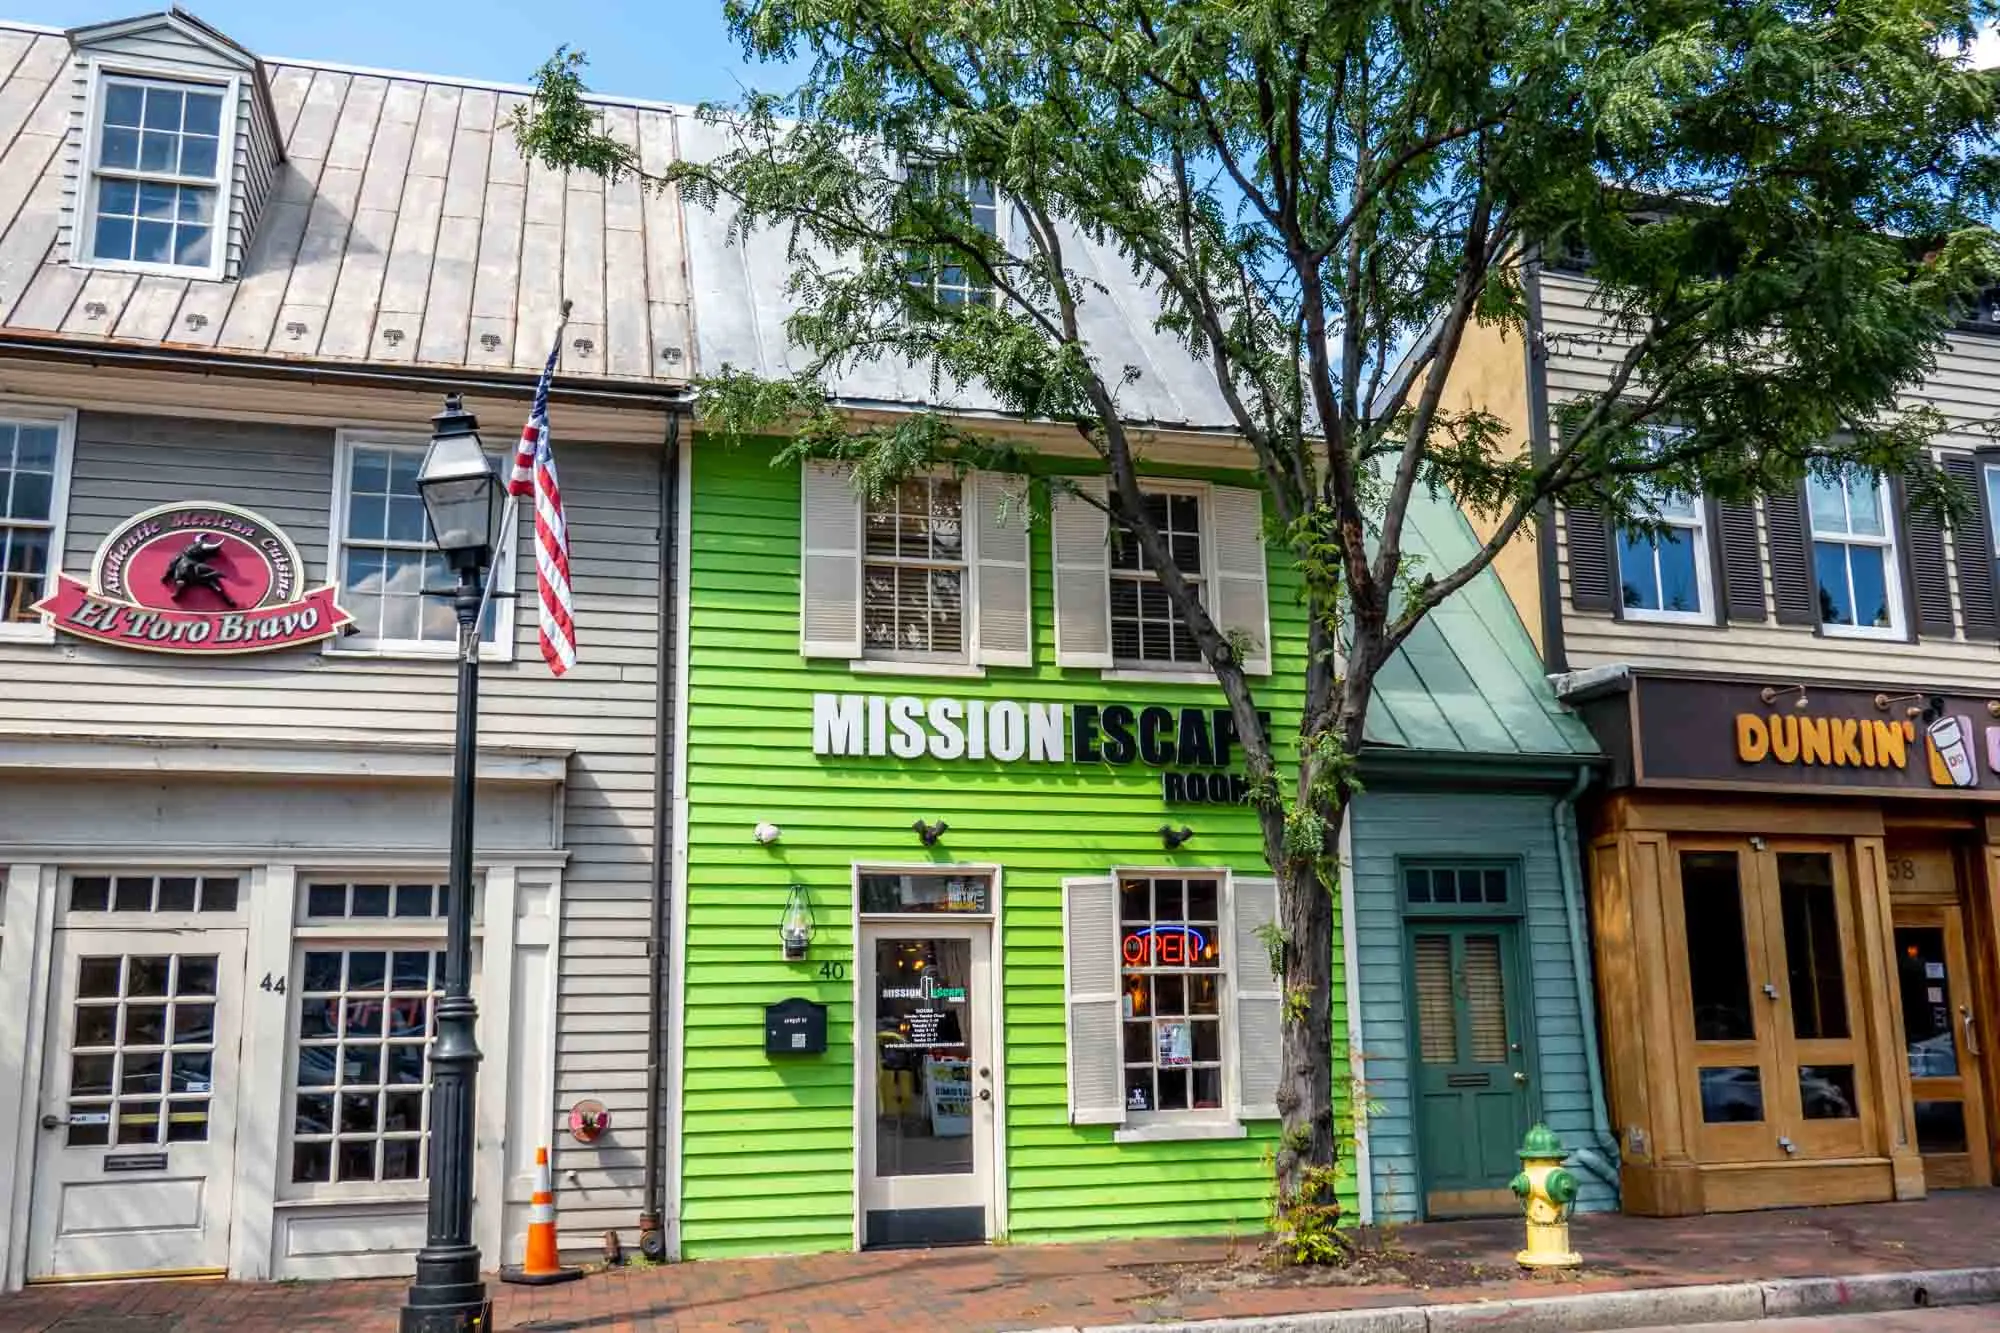 Bright green building with a black and white sign for "Mission Escape Room"